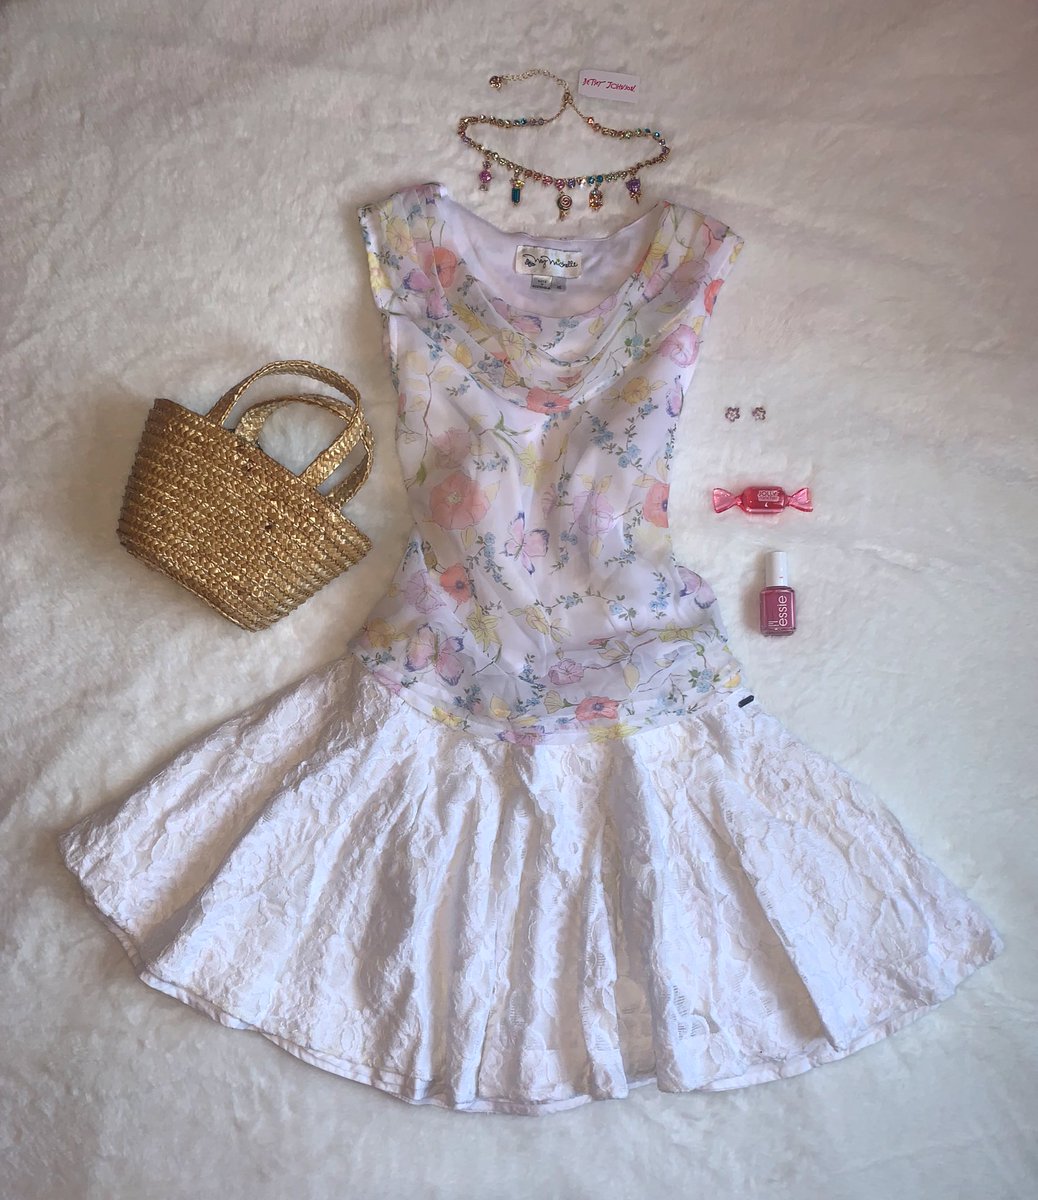 ✨Todays thrifted outfit inspo:🍭🌸🍬

#Thriftedoutfit #Thriftedfashion #Thriftedstyle #Secondhandoutfit #secondhandstyle #style #Styleinspo #Styleinspiration #Fashioninspiration #Fashioninspo #outfitoftheday #OOTD #OotdStyle #Outfitinspo #springoutfit #softgirl #BetseyJohnson